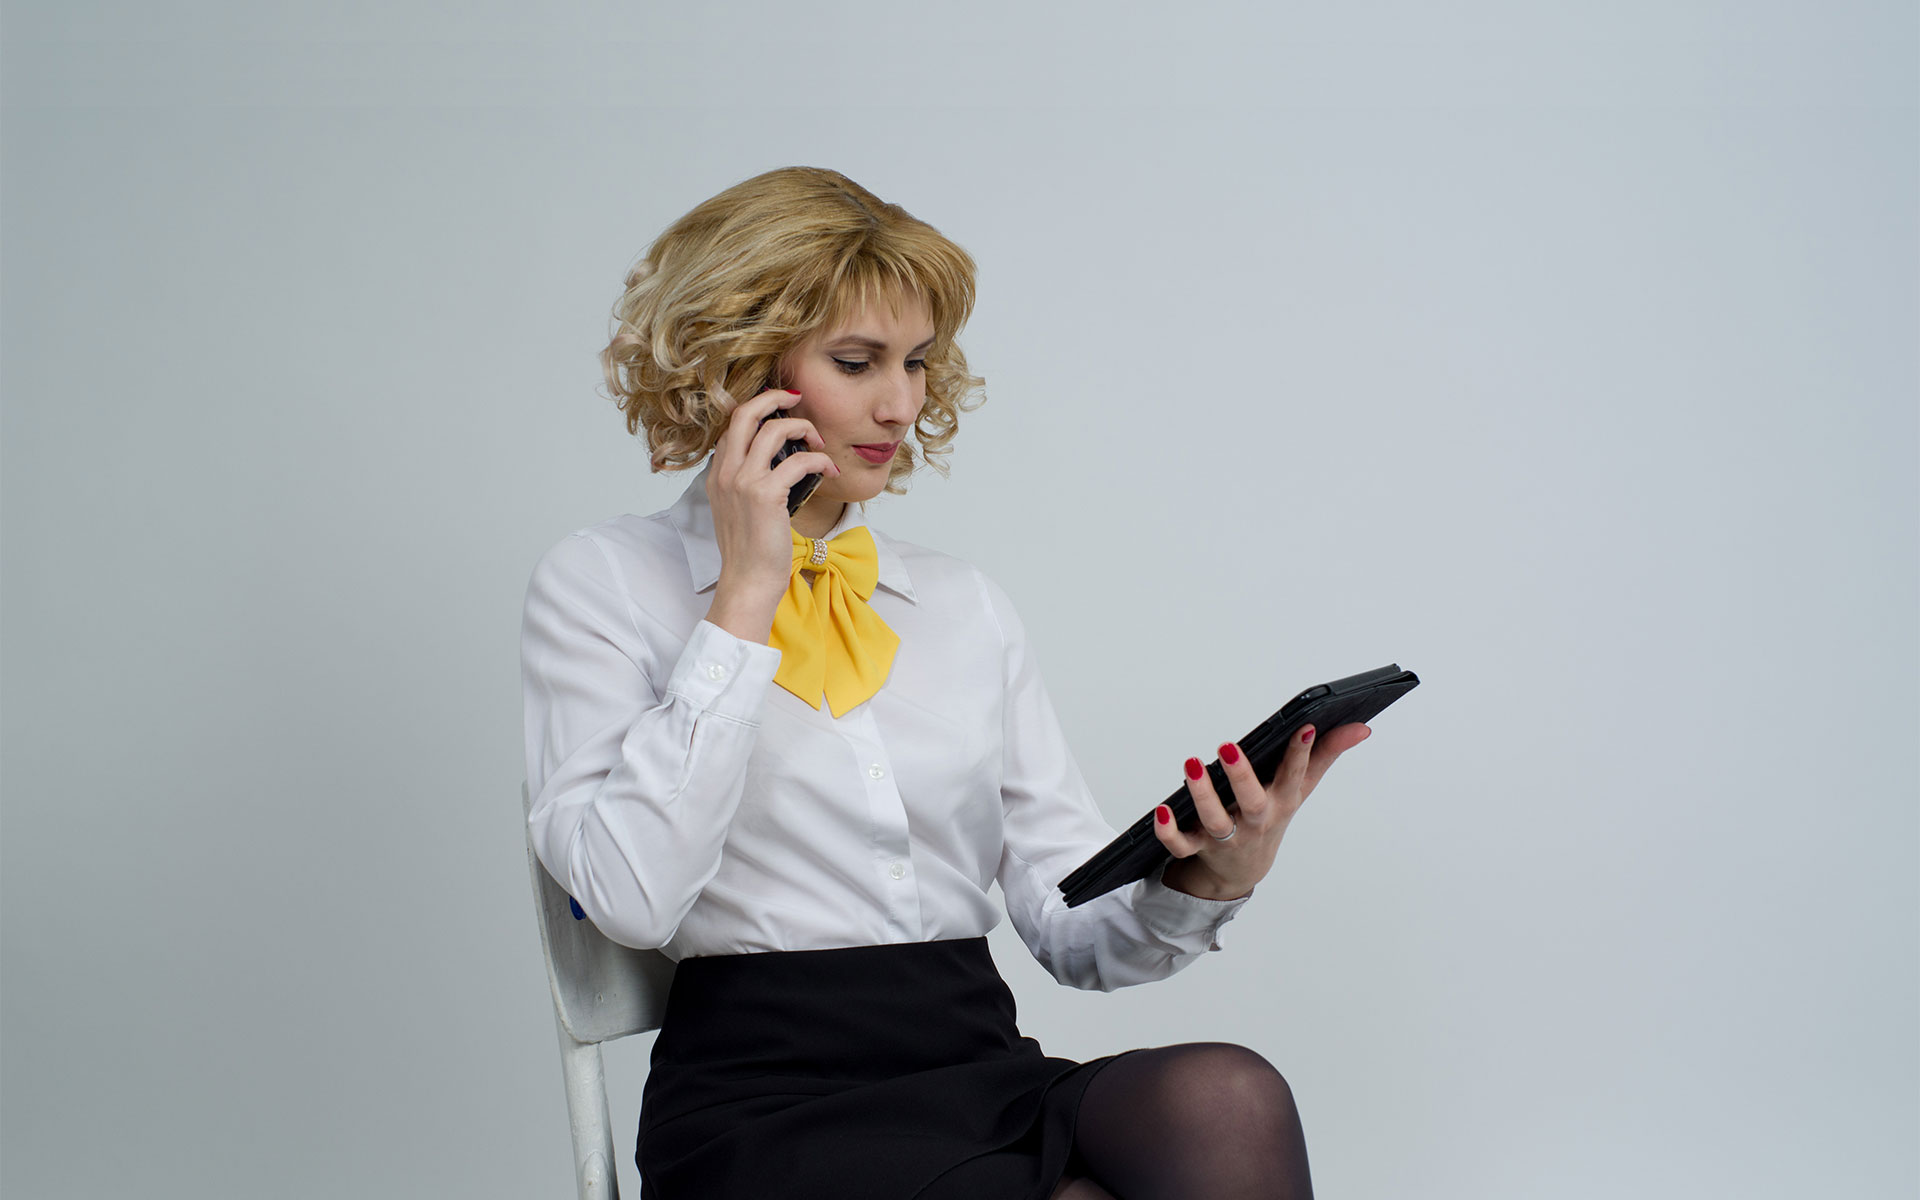 5 Questions That Must Be Answered Before You Get On A Sales Call